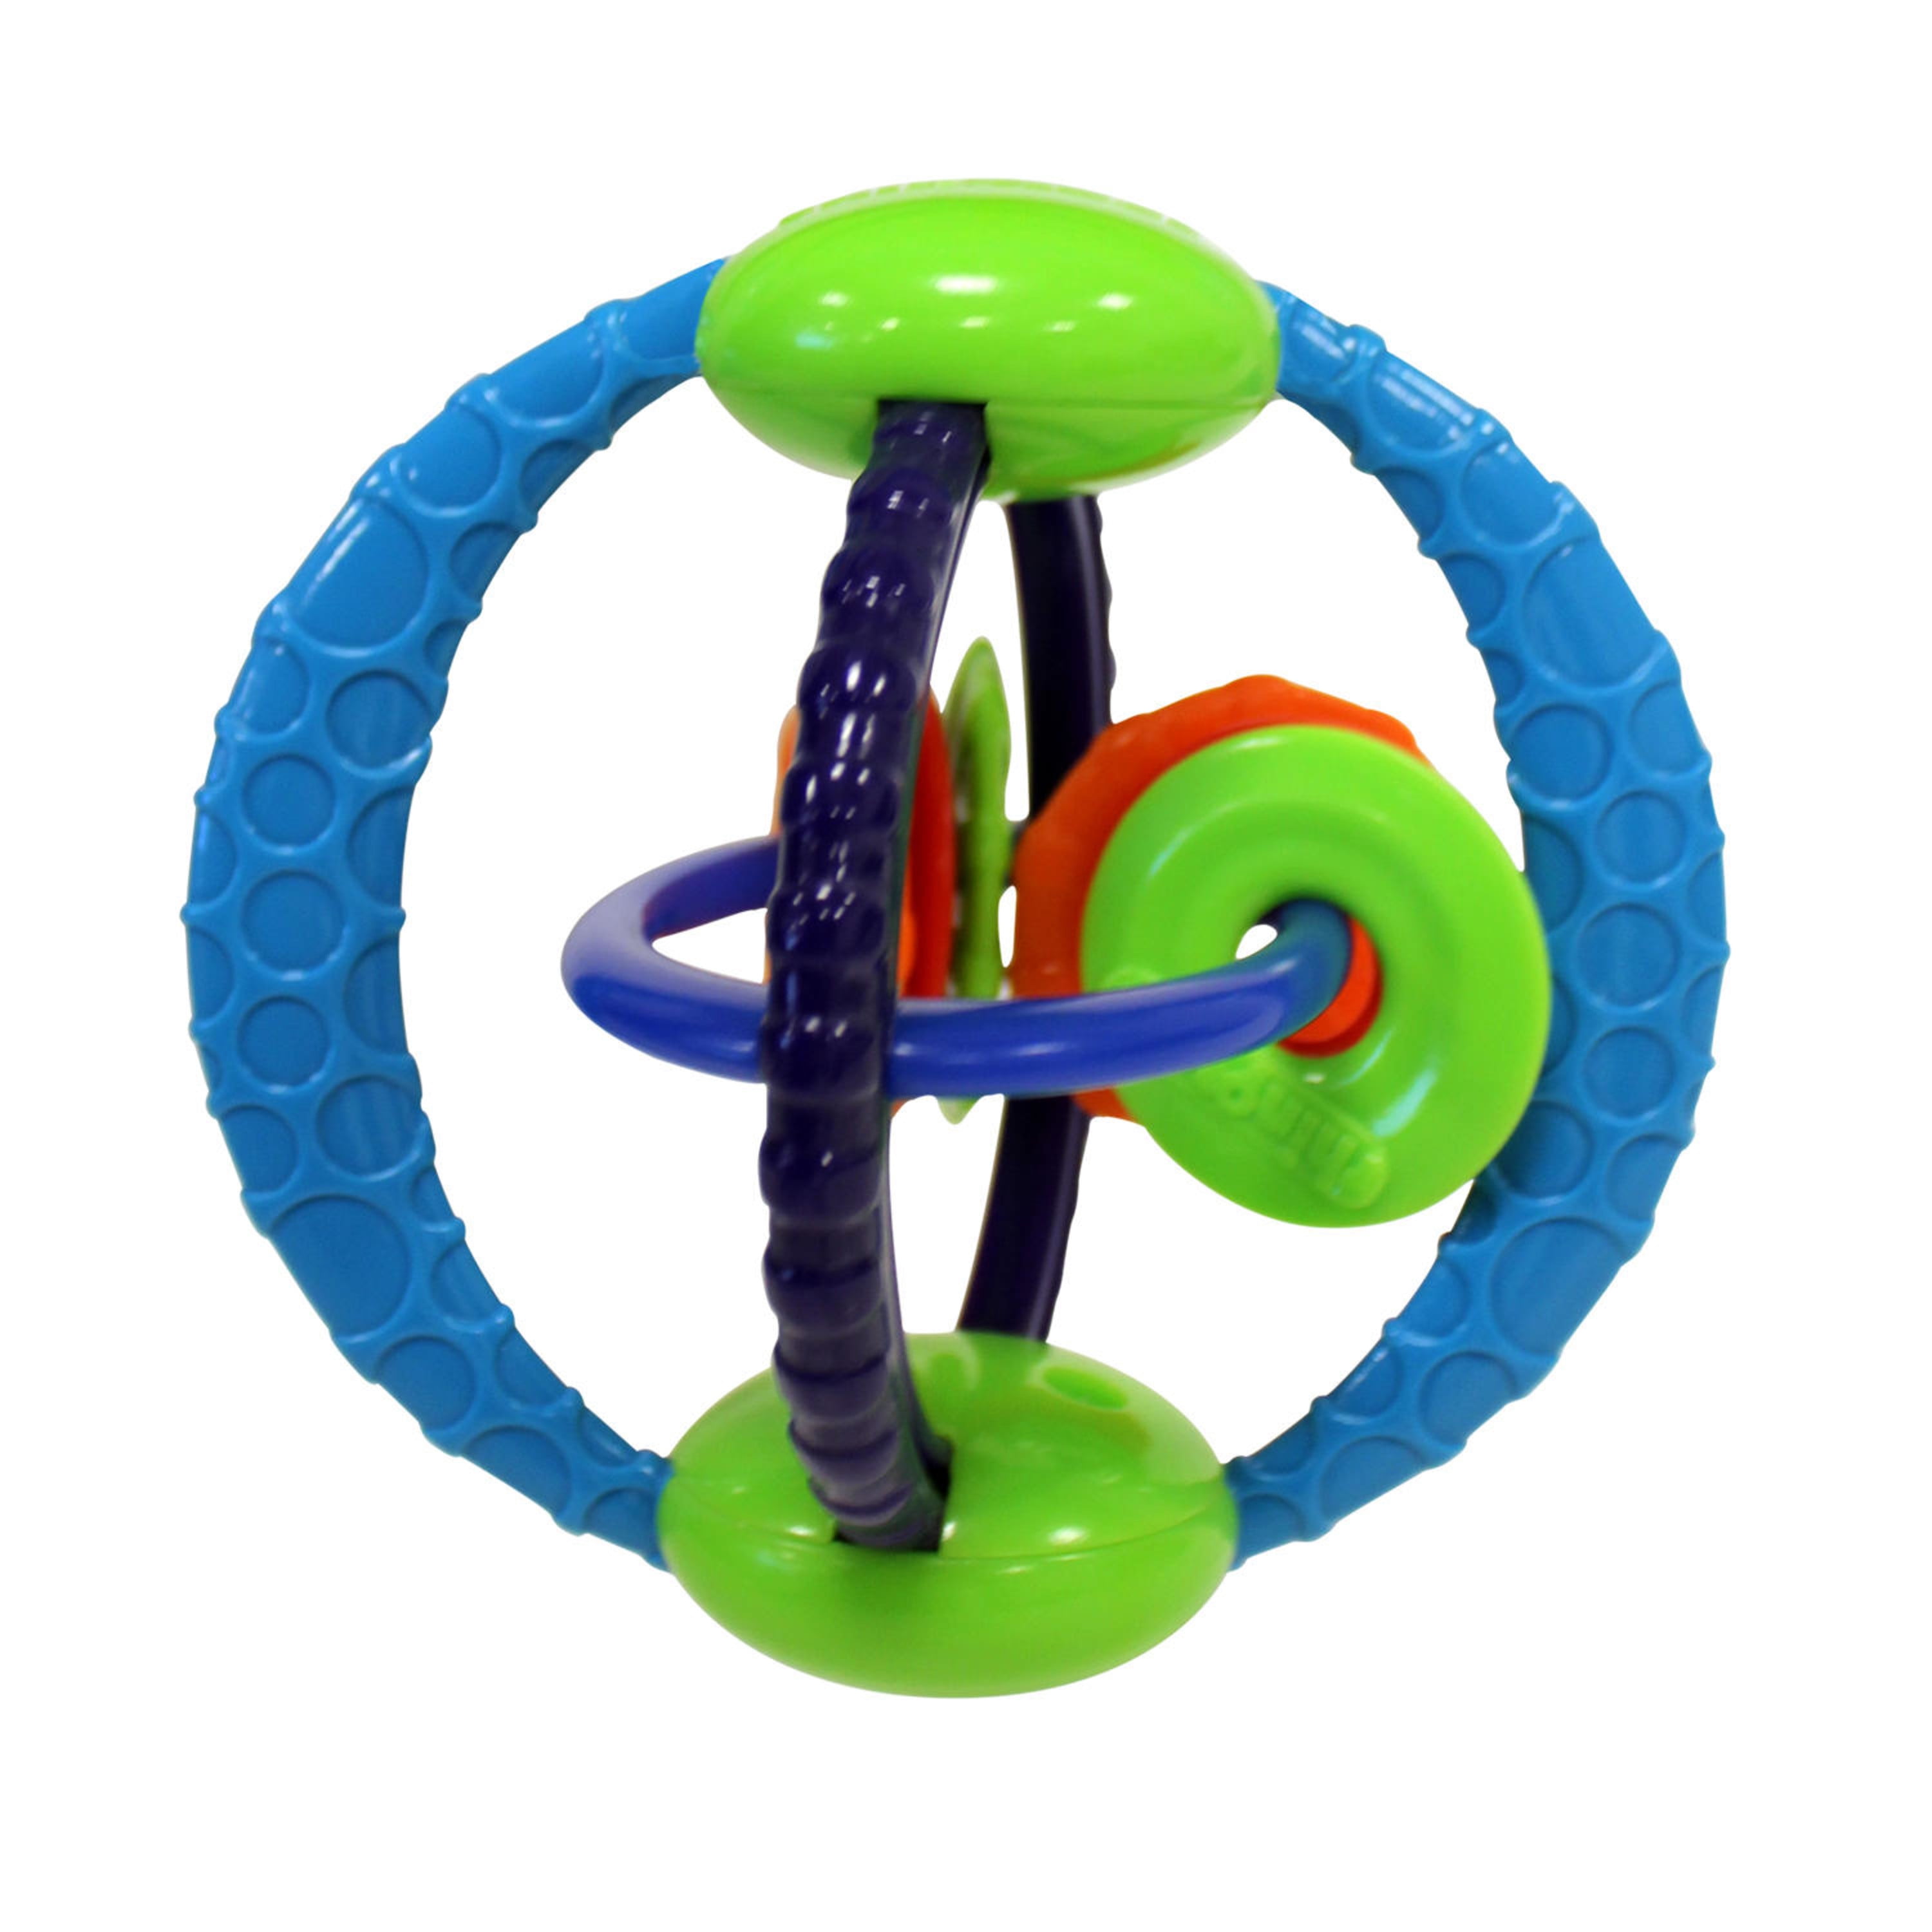 Suitable Fro Funky Multi Activity Triangle Toy With Rattles Spinners & Mirror 